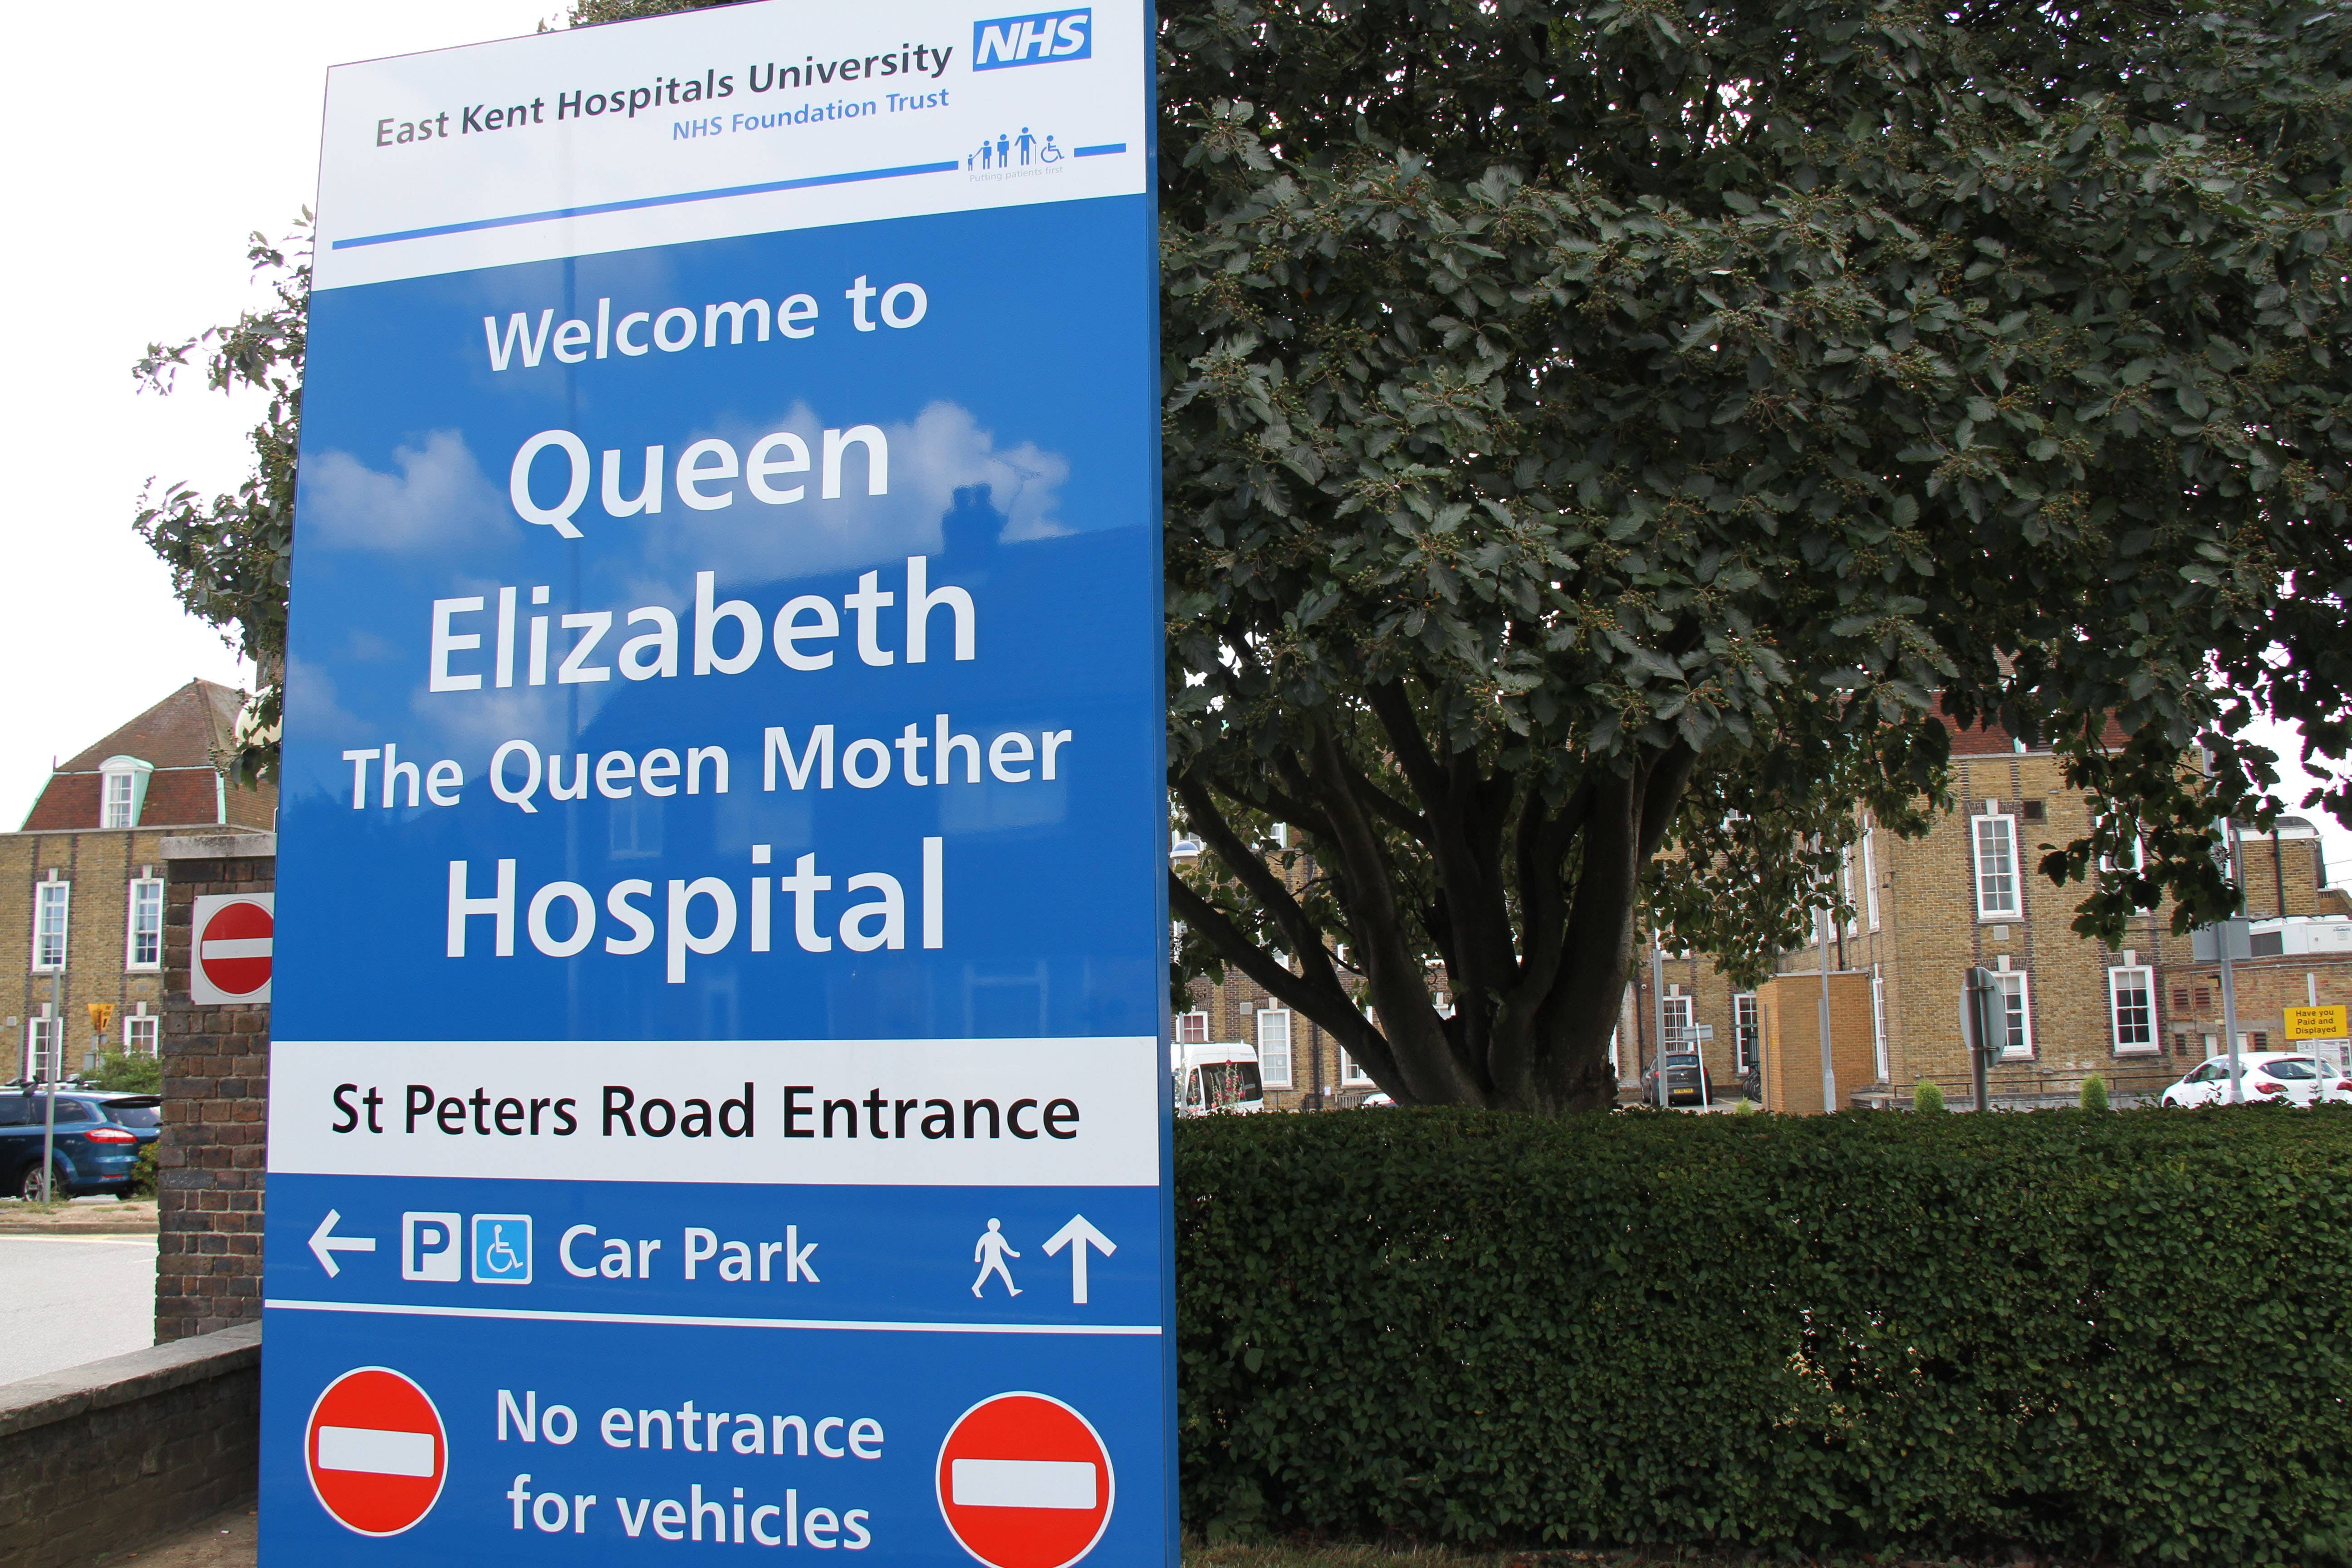 Queen Elizabeth The Queen Mother Hospital in Margate, Kent (Alamy/PA)